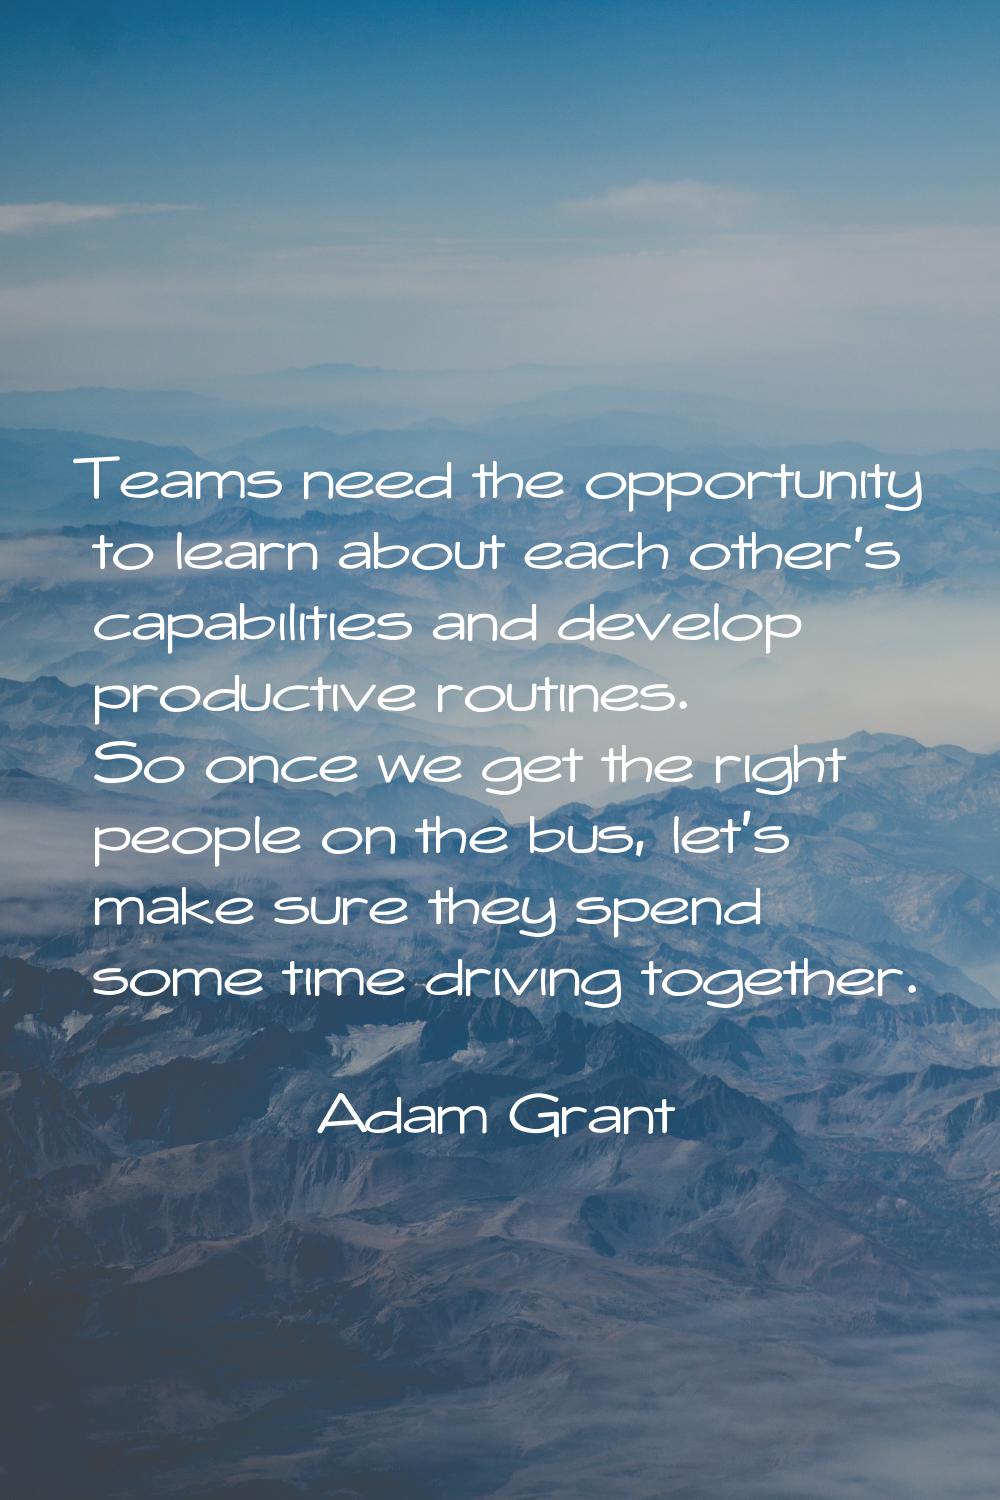 Teams need the opportunity to learn about each other's capabilities and develop productive routines